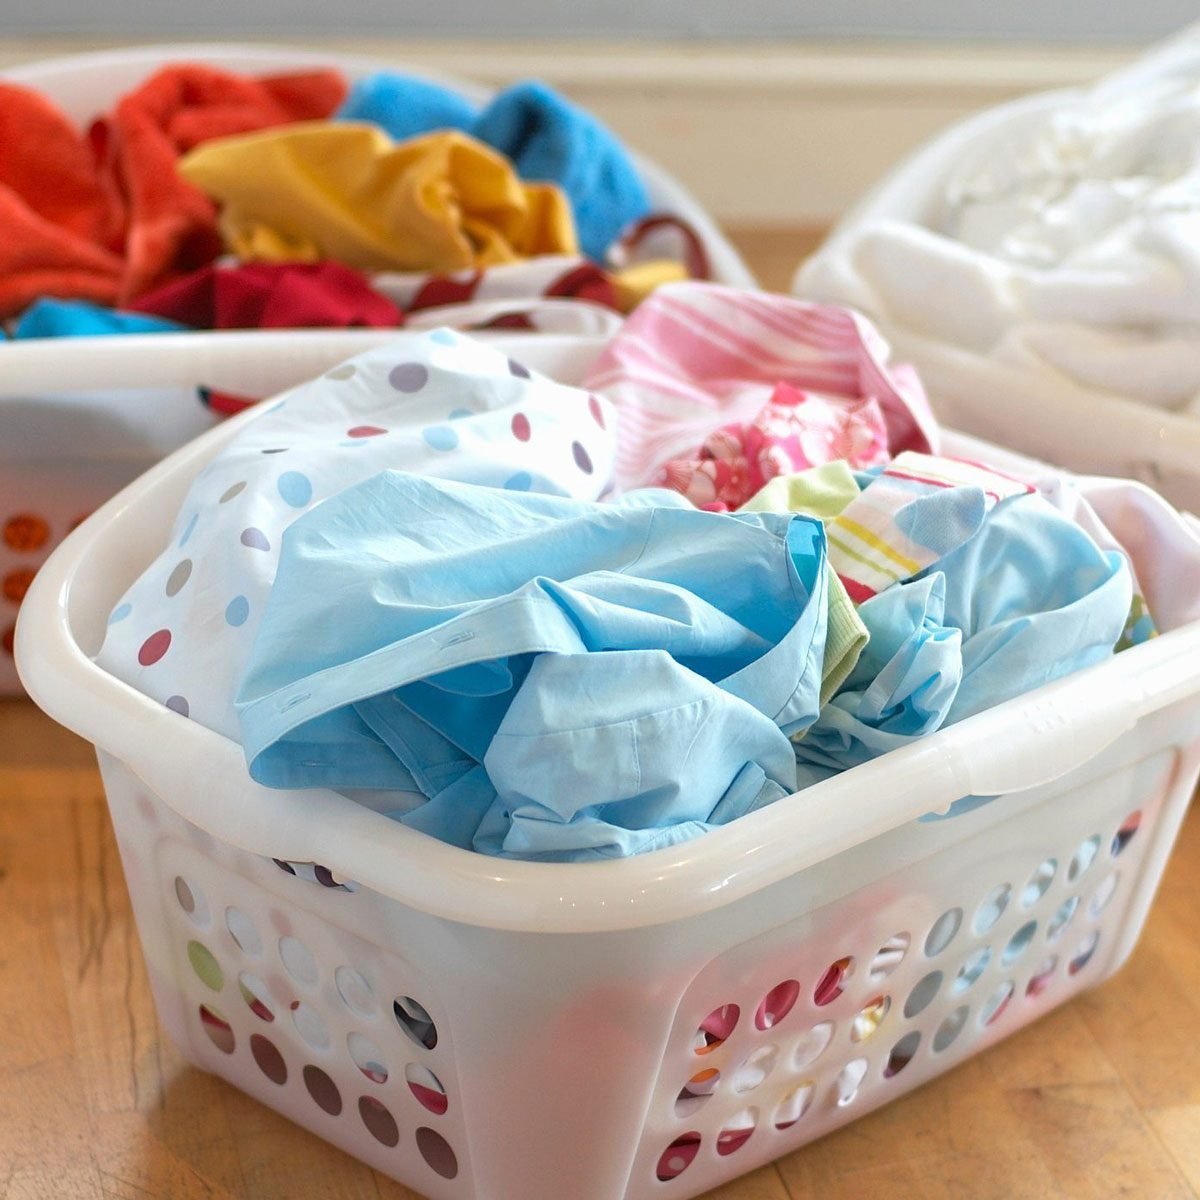 14 Laundry Myths That Are Ruining Your Clothes